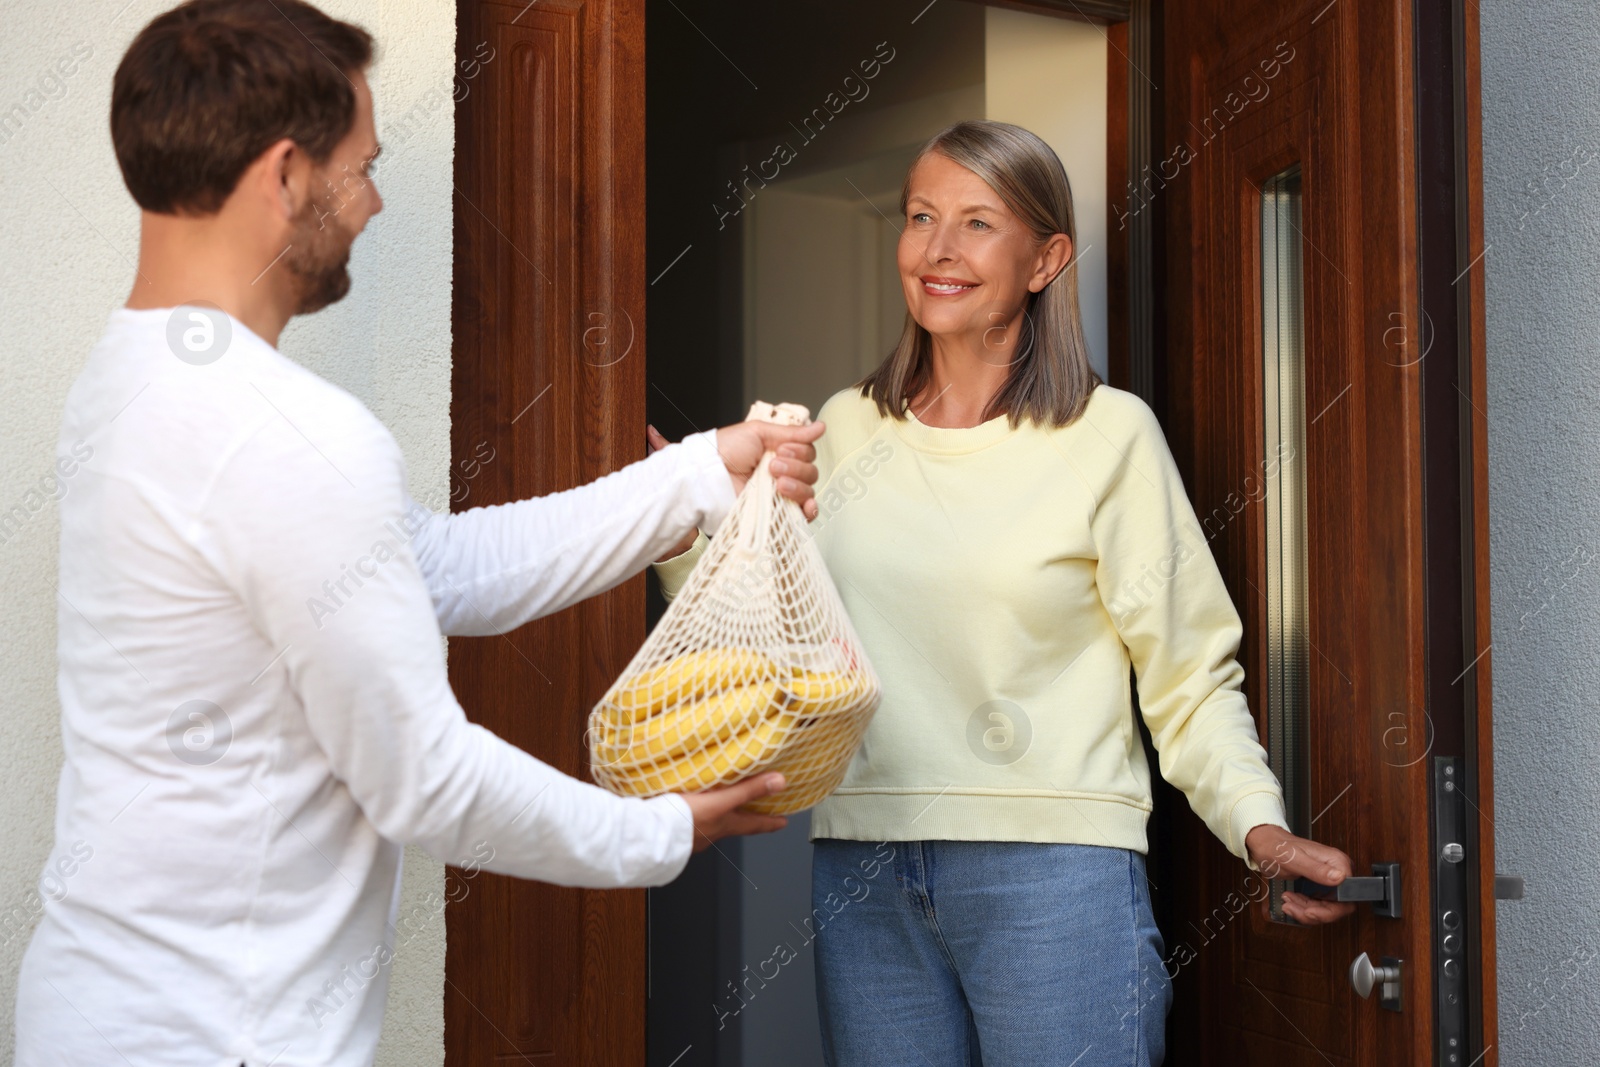 Photo of Helping neighbours. Man with net bag of products visiting senior woman outdoors